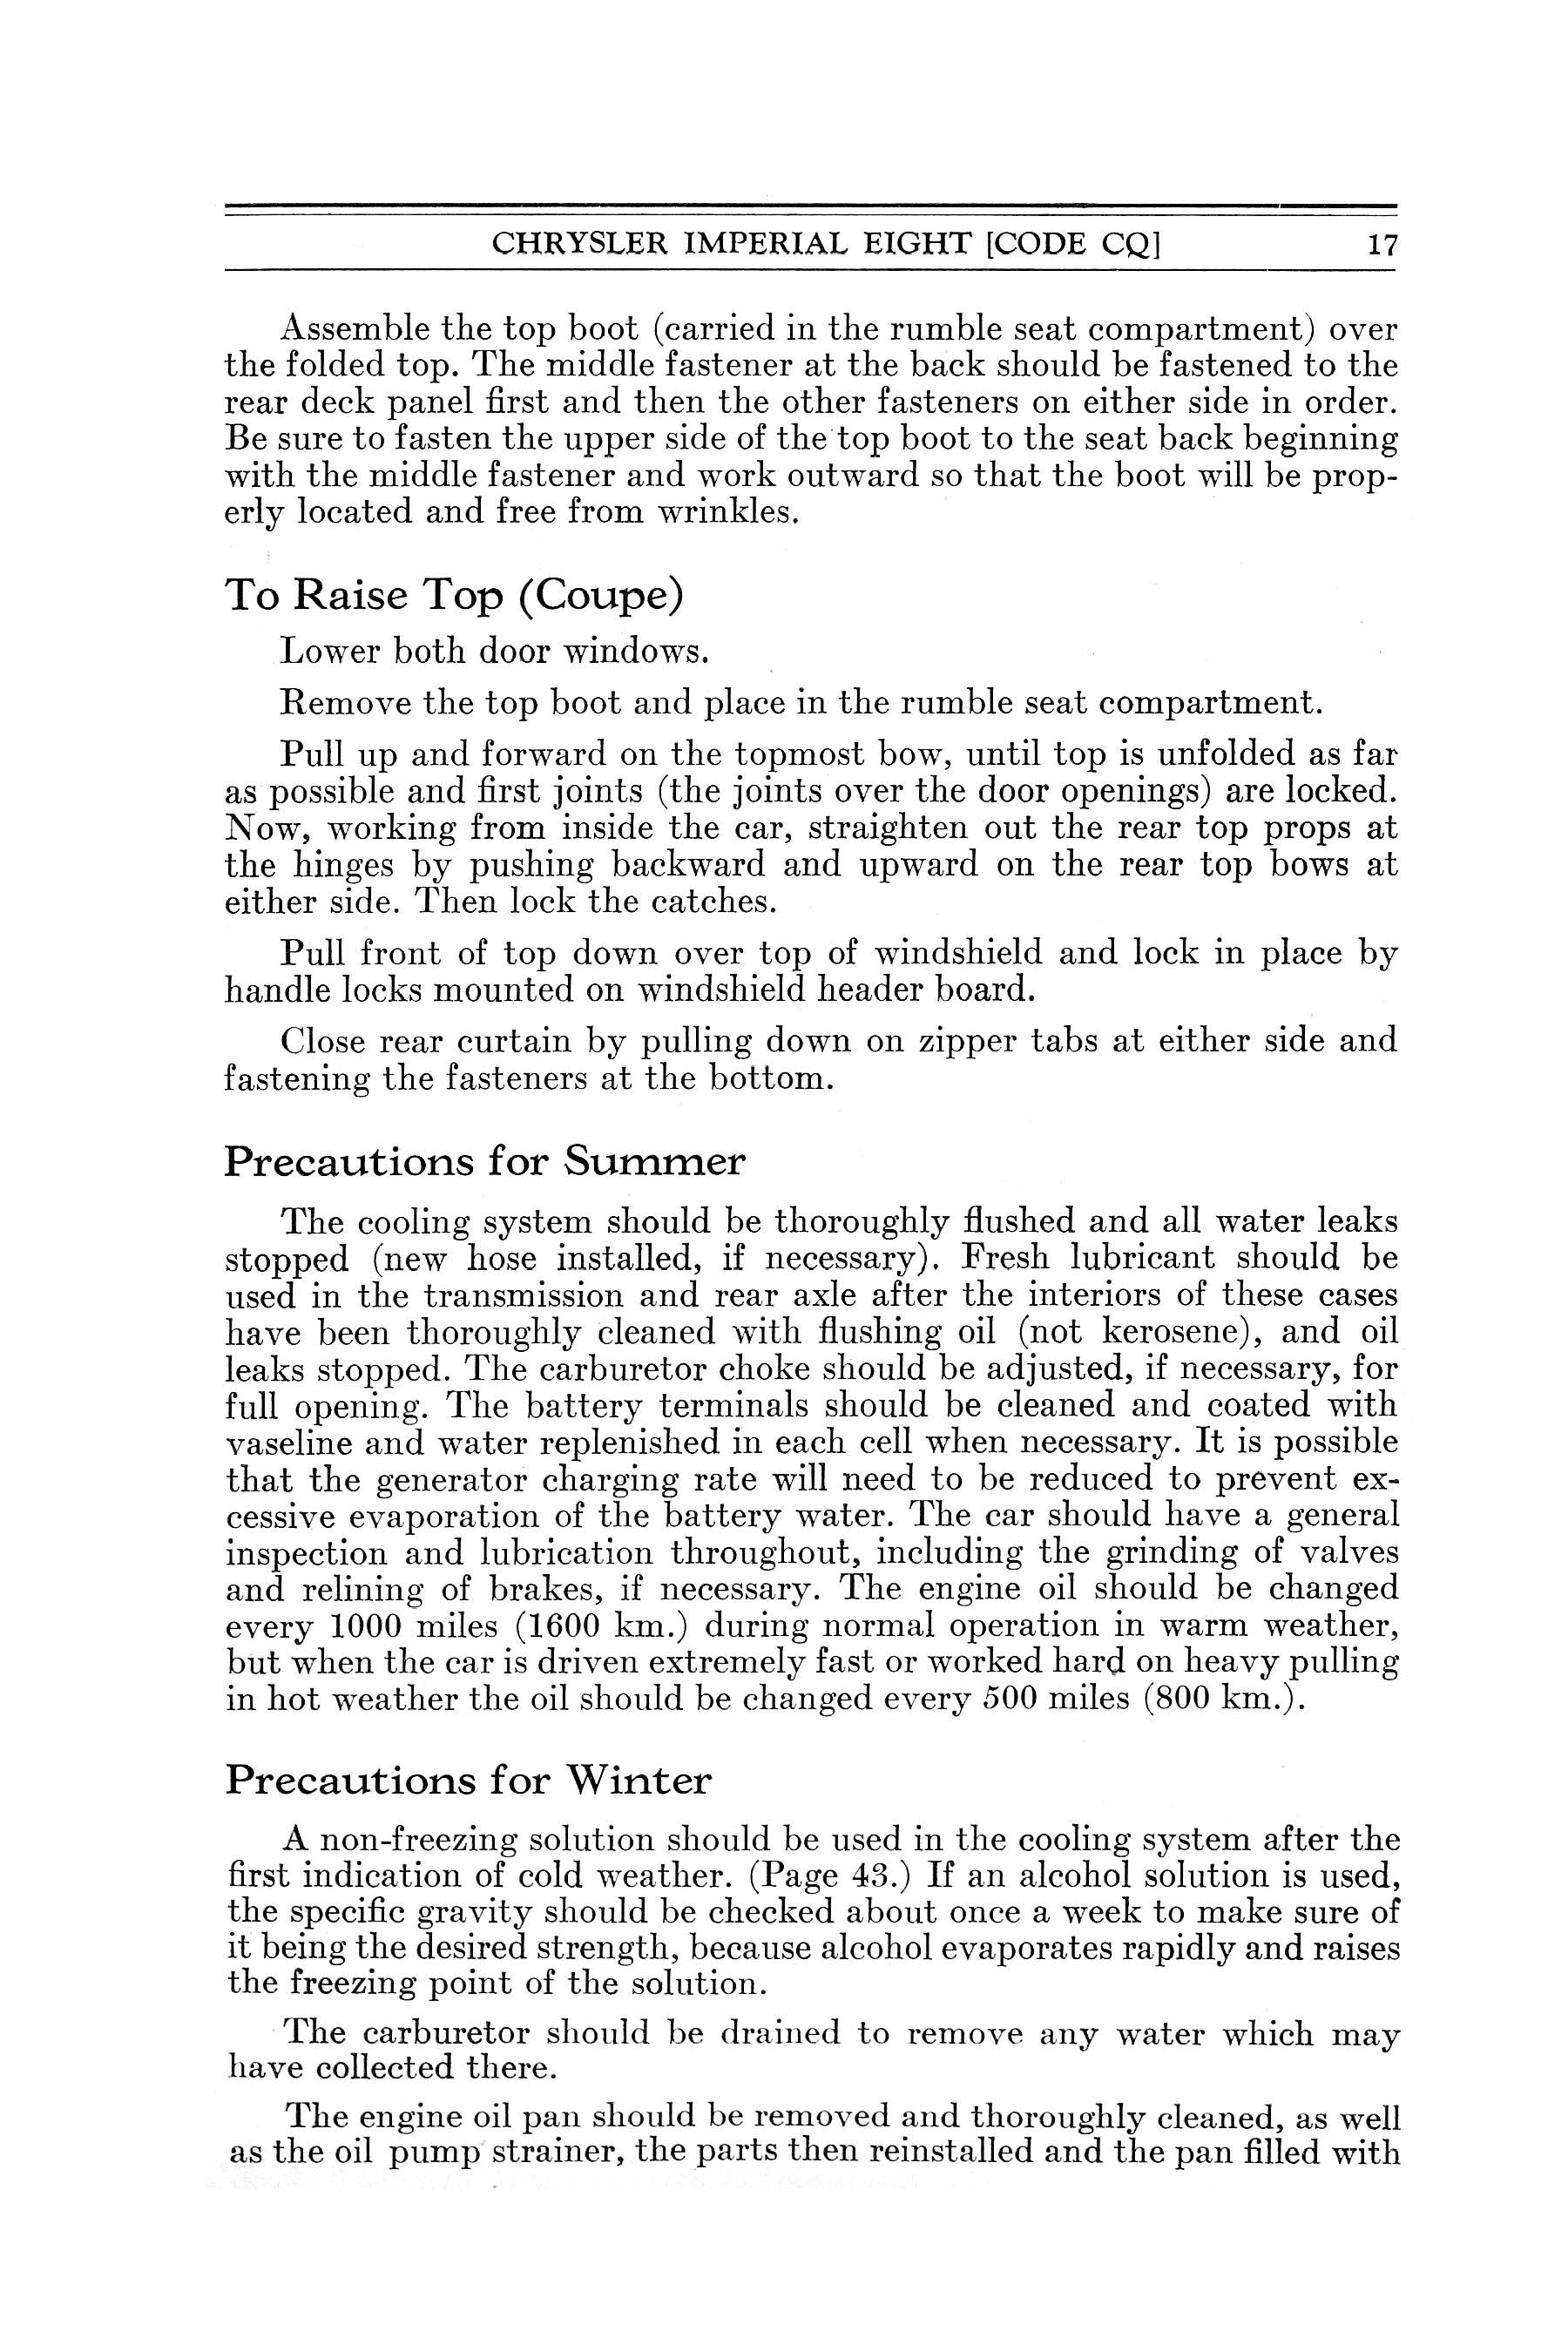 1933_Imperial_Instruction_Book-017